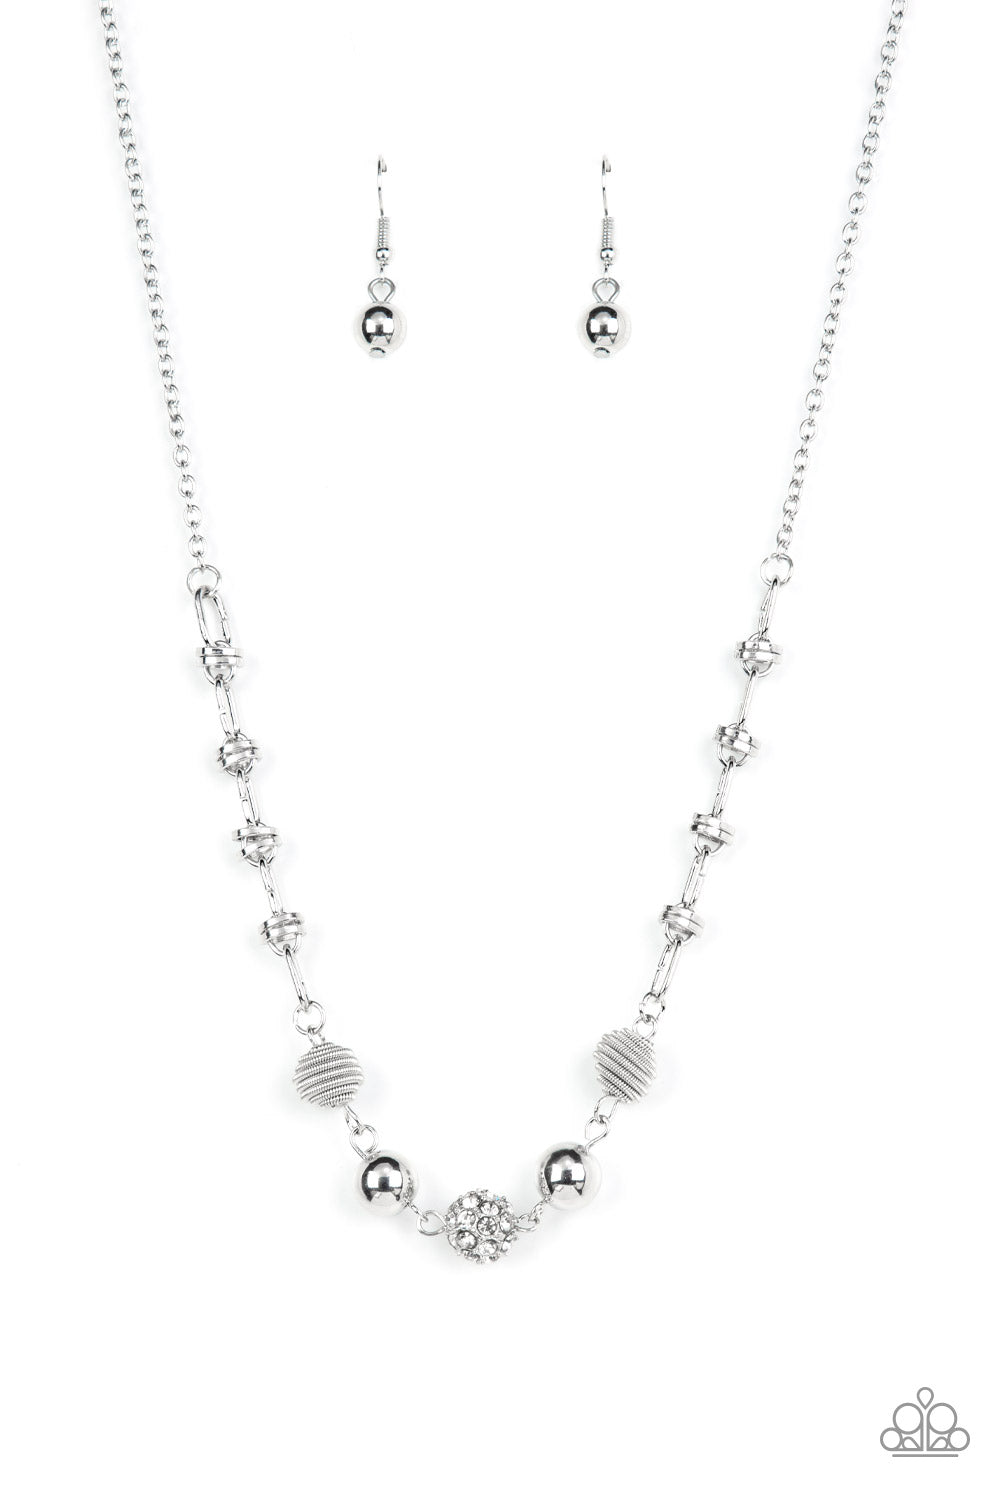 Pairs of silver coiled and smooth silver beads flank a white rhinestone encrusted bead along an oval and silver disc linked chain